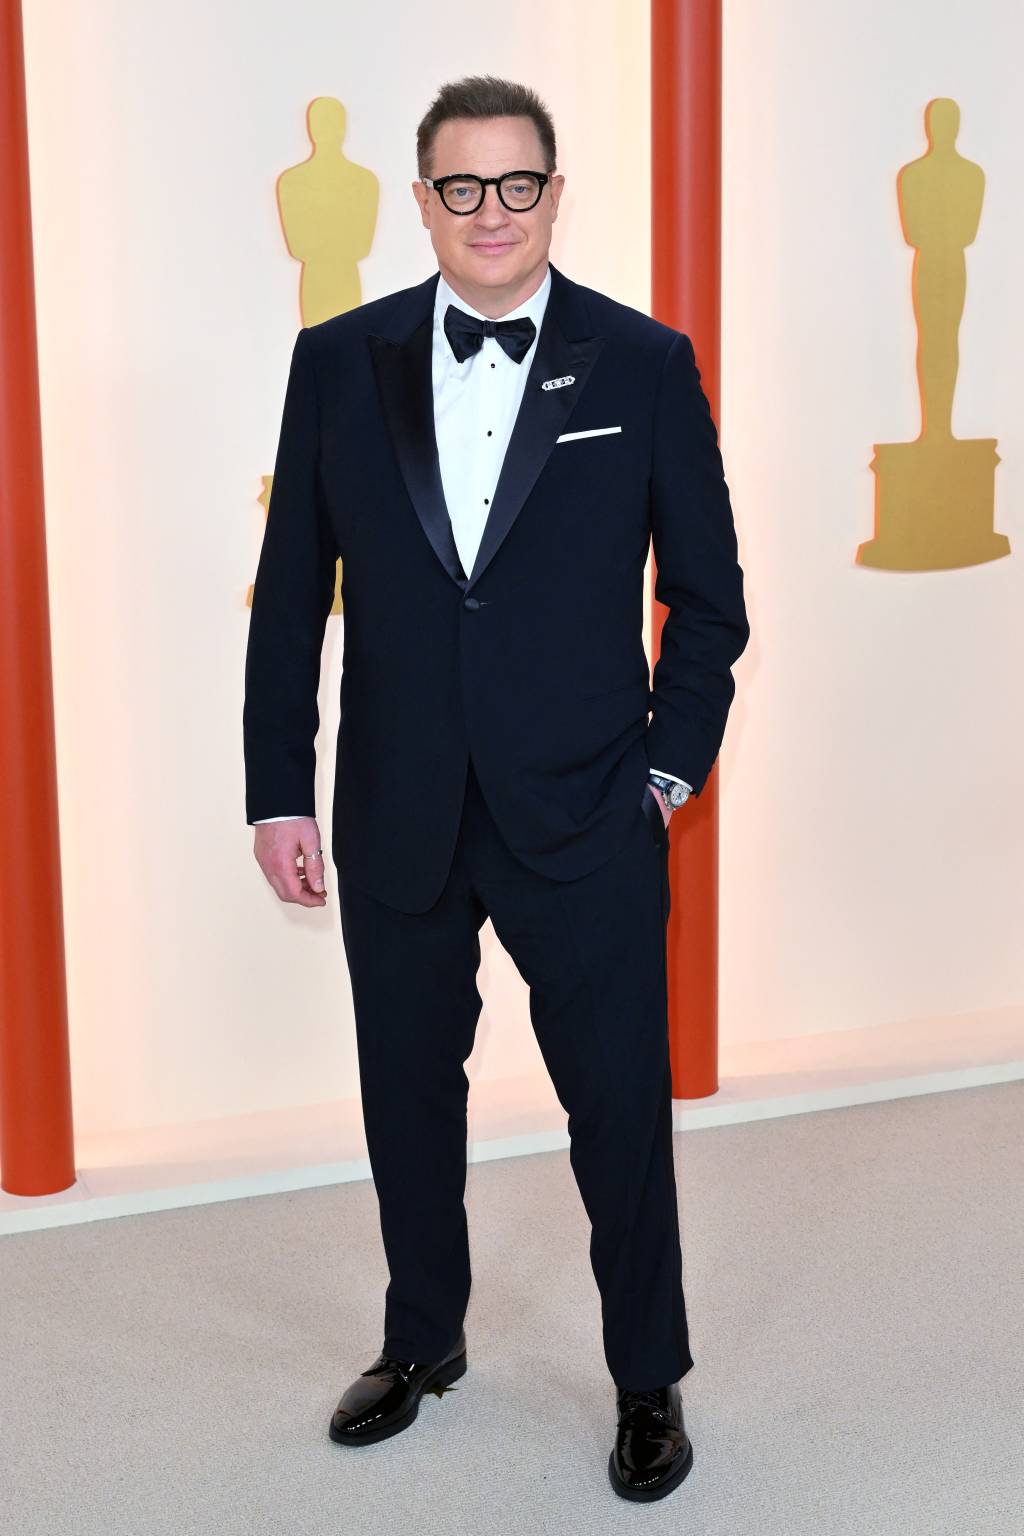 US-canadian actor Brendan Fraser attends the 95th Annual Academy Awards at the Dolby Theatre in Hollywood, California on March 12, 2023. (Photo by ANGELA WEISS / AFP)